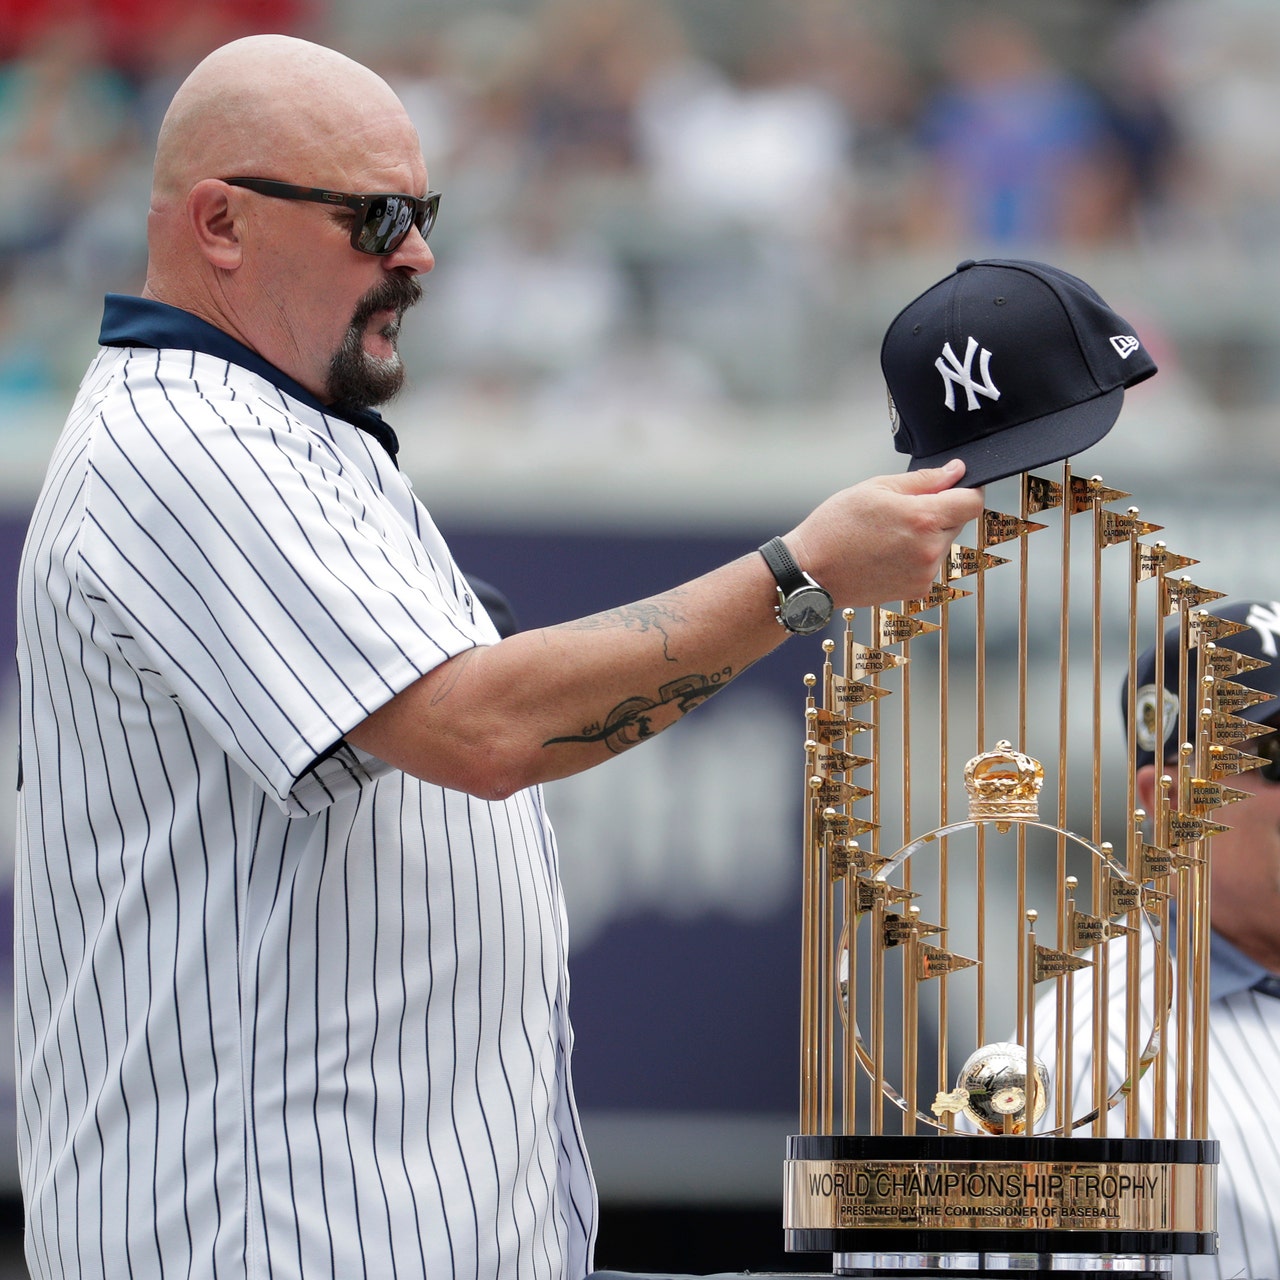 1998 New York Yankees World Series Champions Trophy Presented to